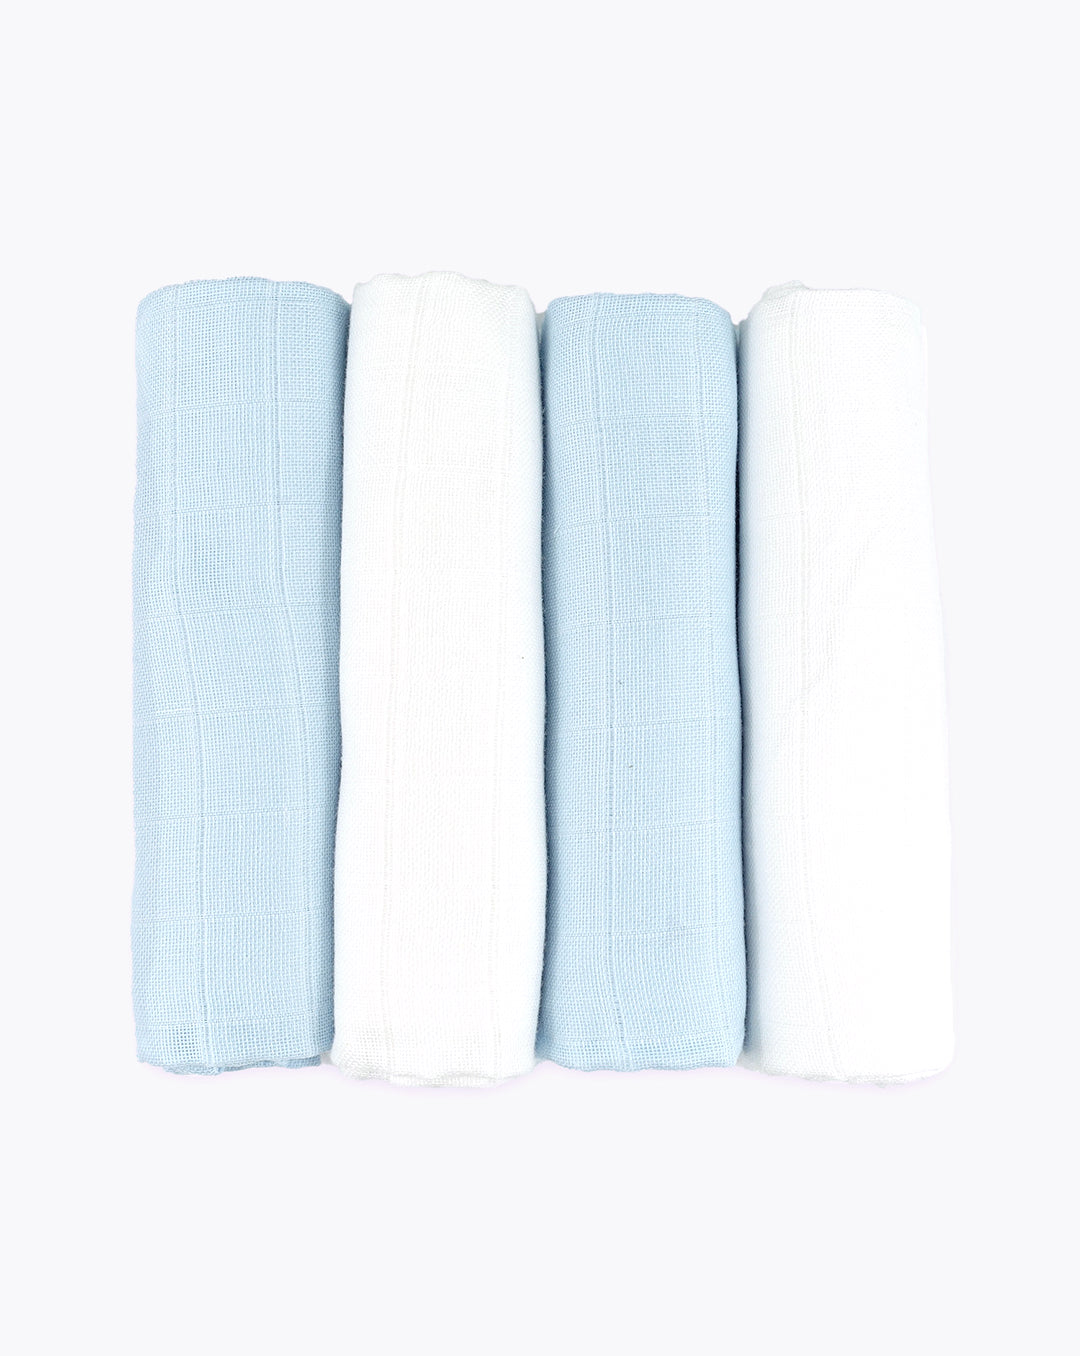 Muslin squares - Pale Blue & White 4 Pack